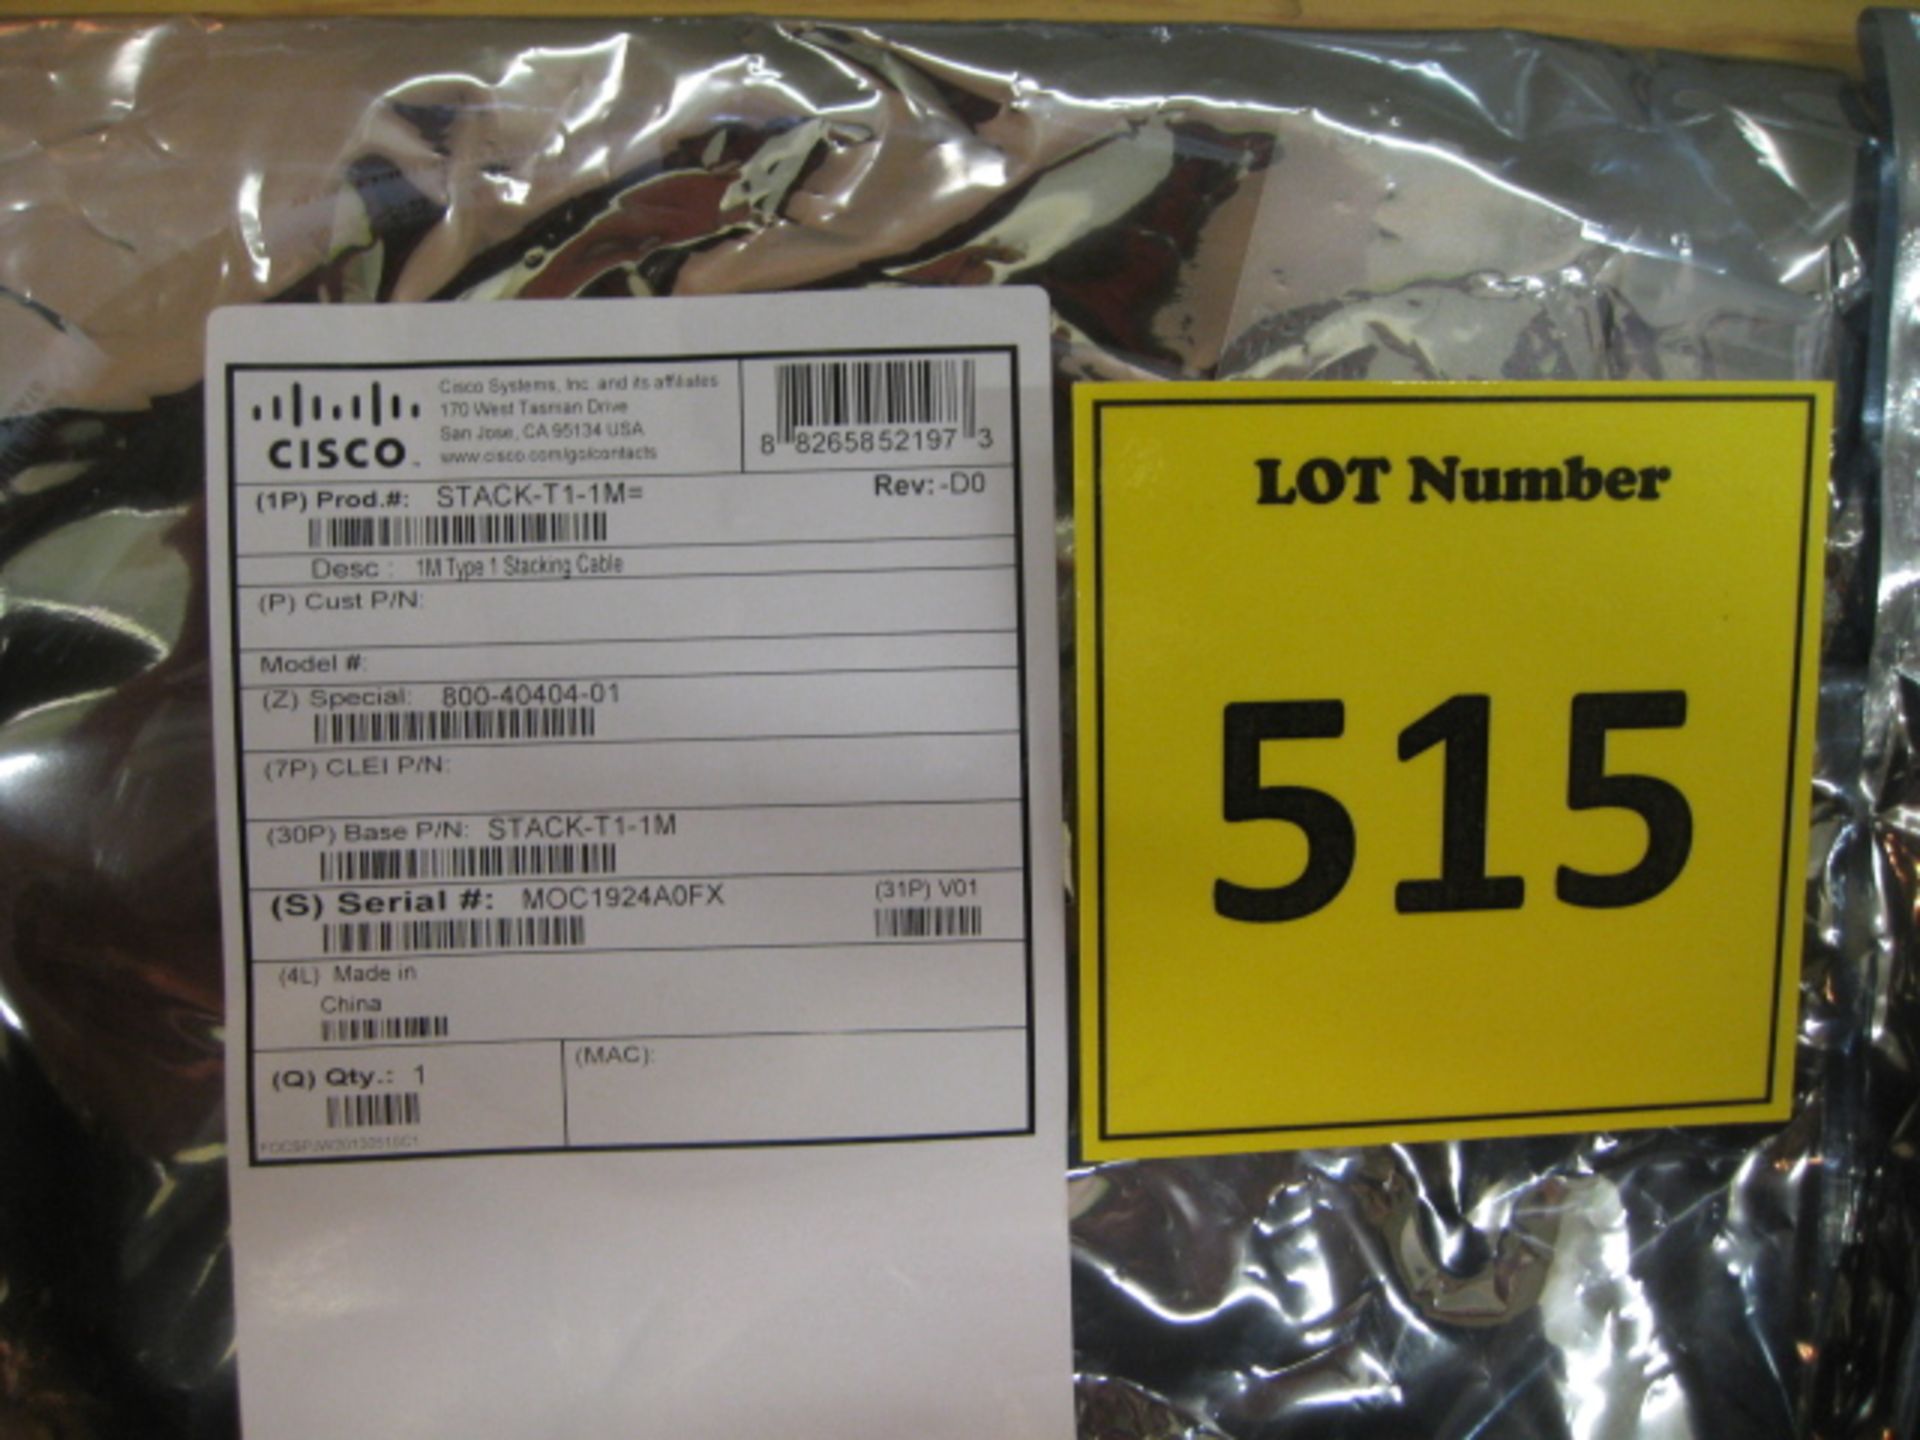 CISCO. 2 X NEW IN SEALED BAGS 1M TYPE 1 STACKING CABLES. STACK-T1-1M= - Image 2 of 2